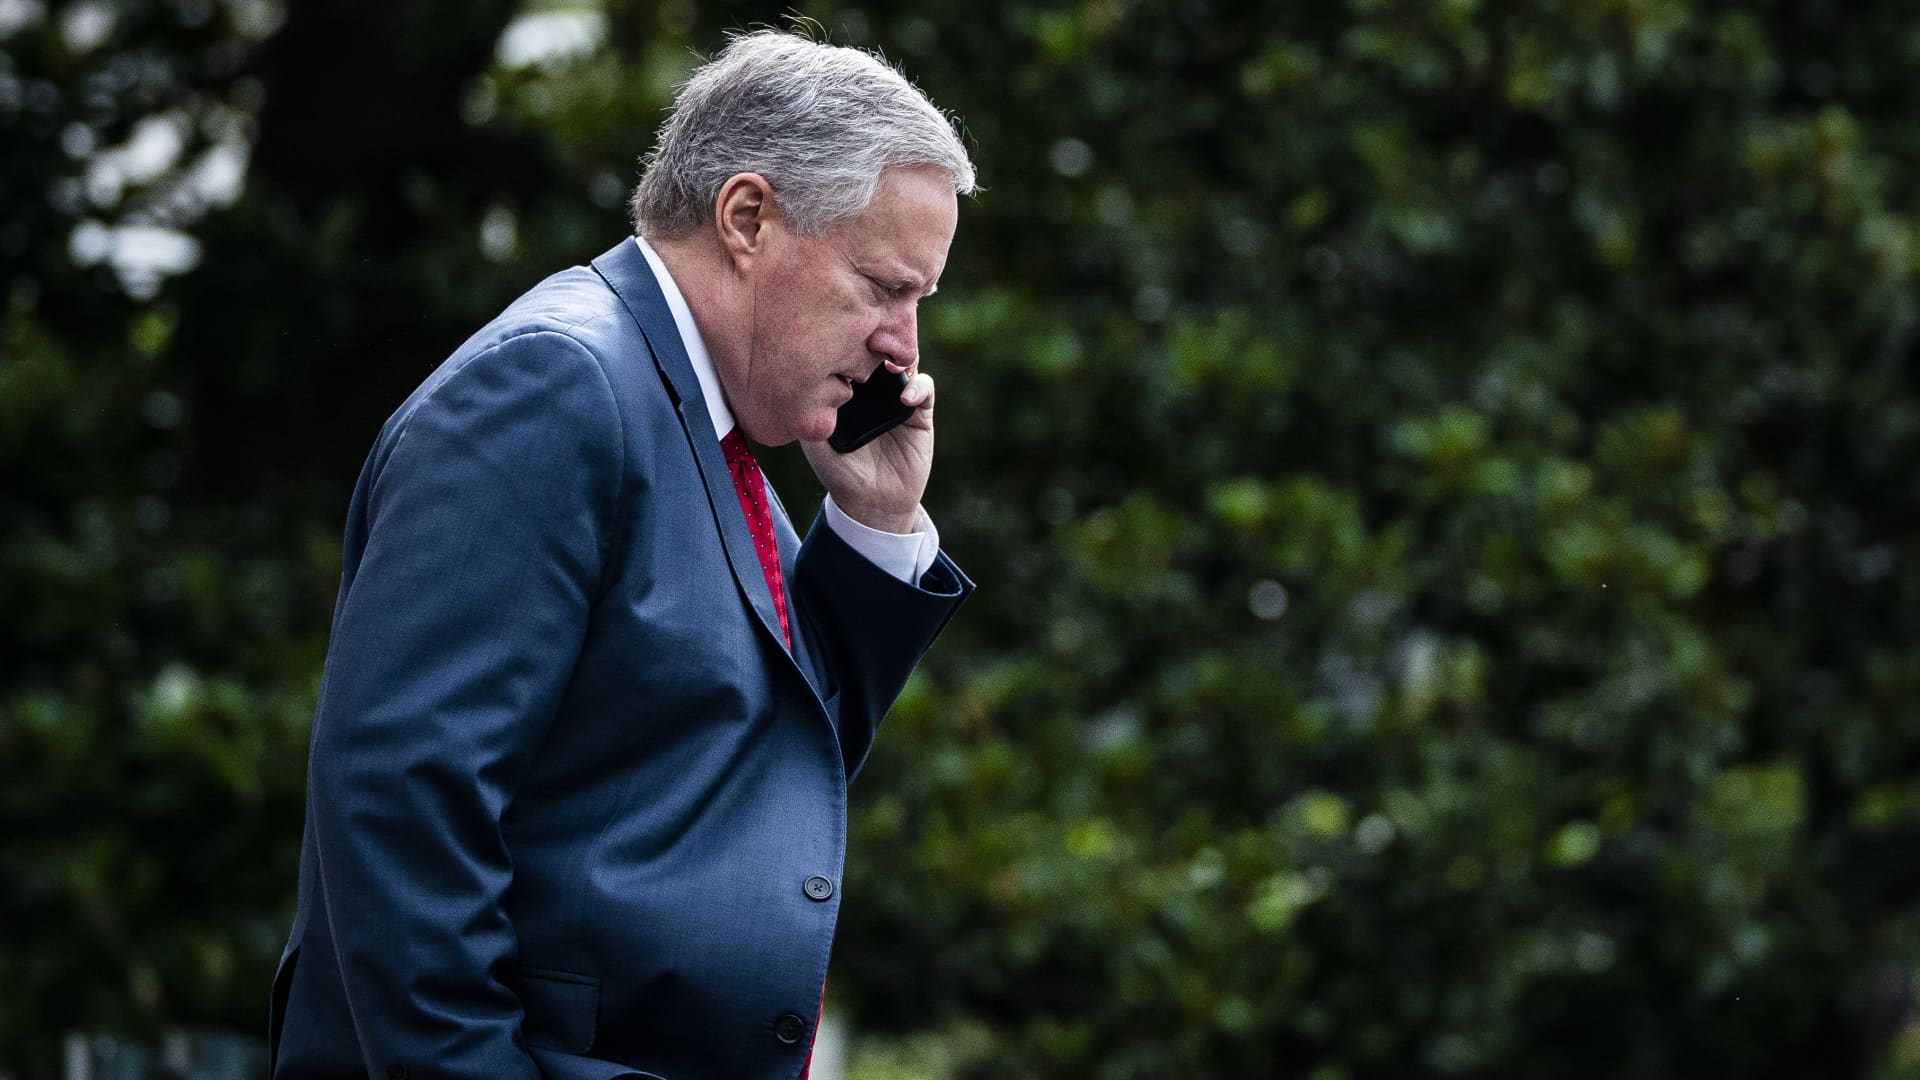 White House Chief of Staff Mark Meadows follows President Donald J. Trump as he walks to board Marine One and depart from the South Lawn of the White House on Friday, July 10, 2020 in Washington, DC.